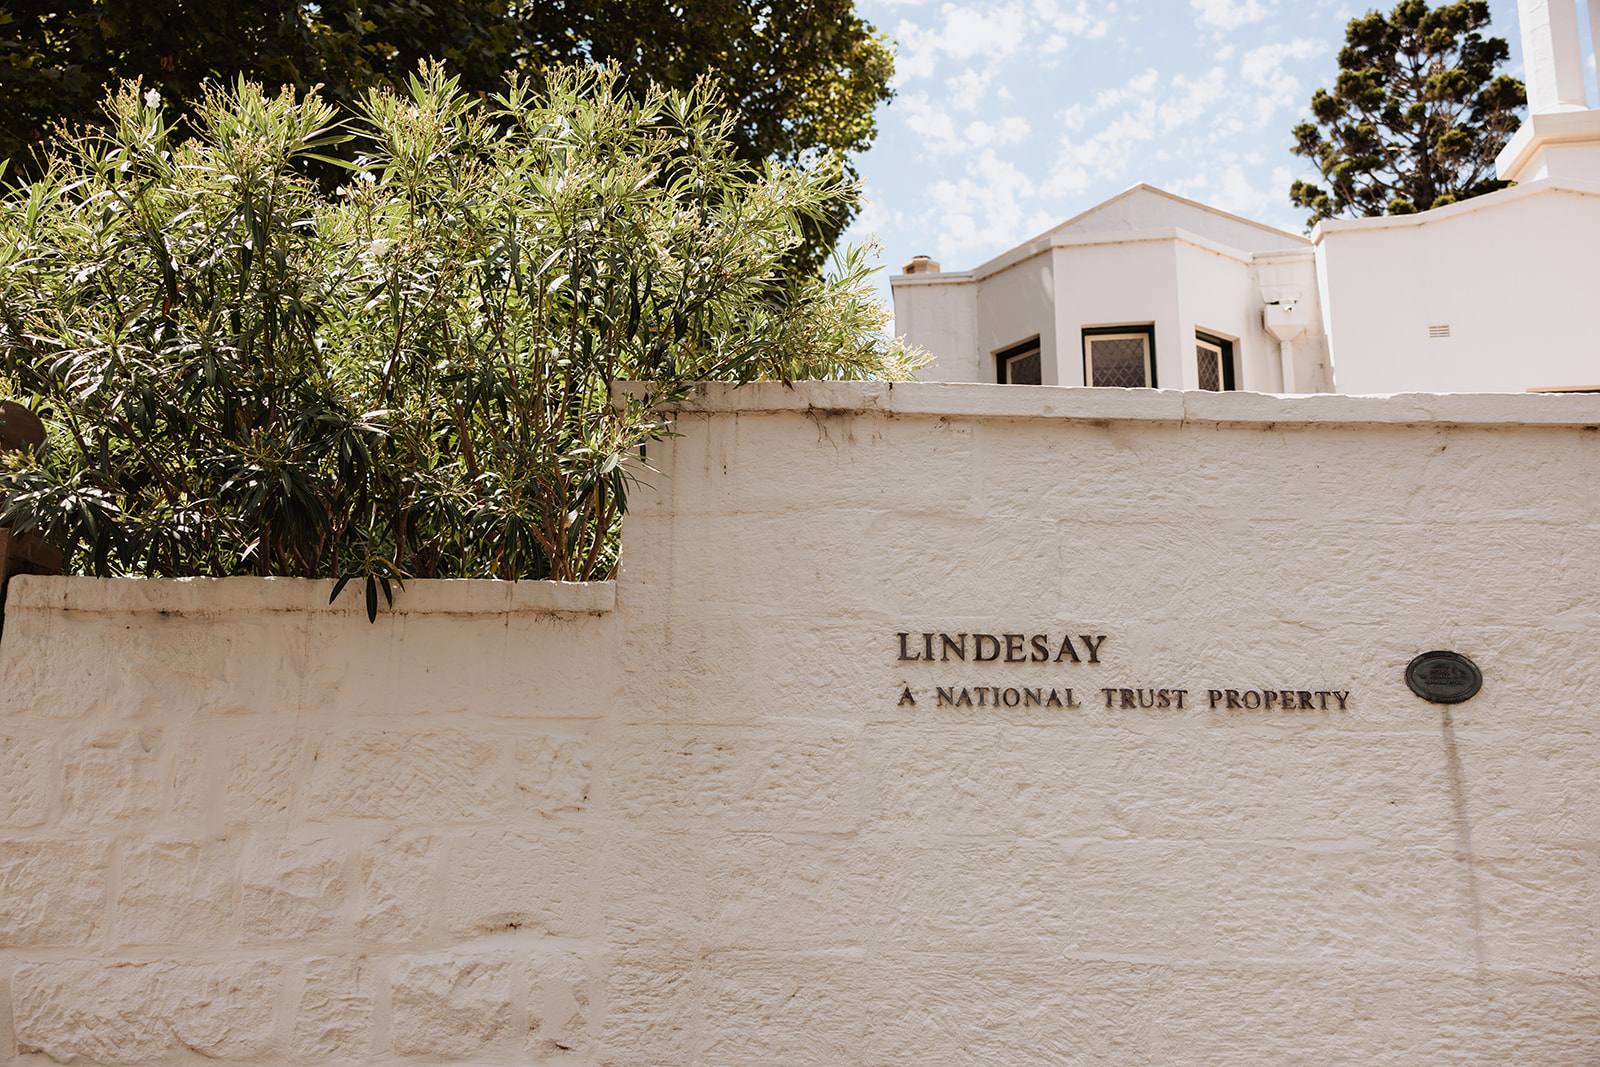 Lindesay House, Darling Point New South Wales